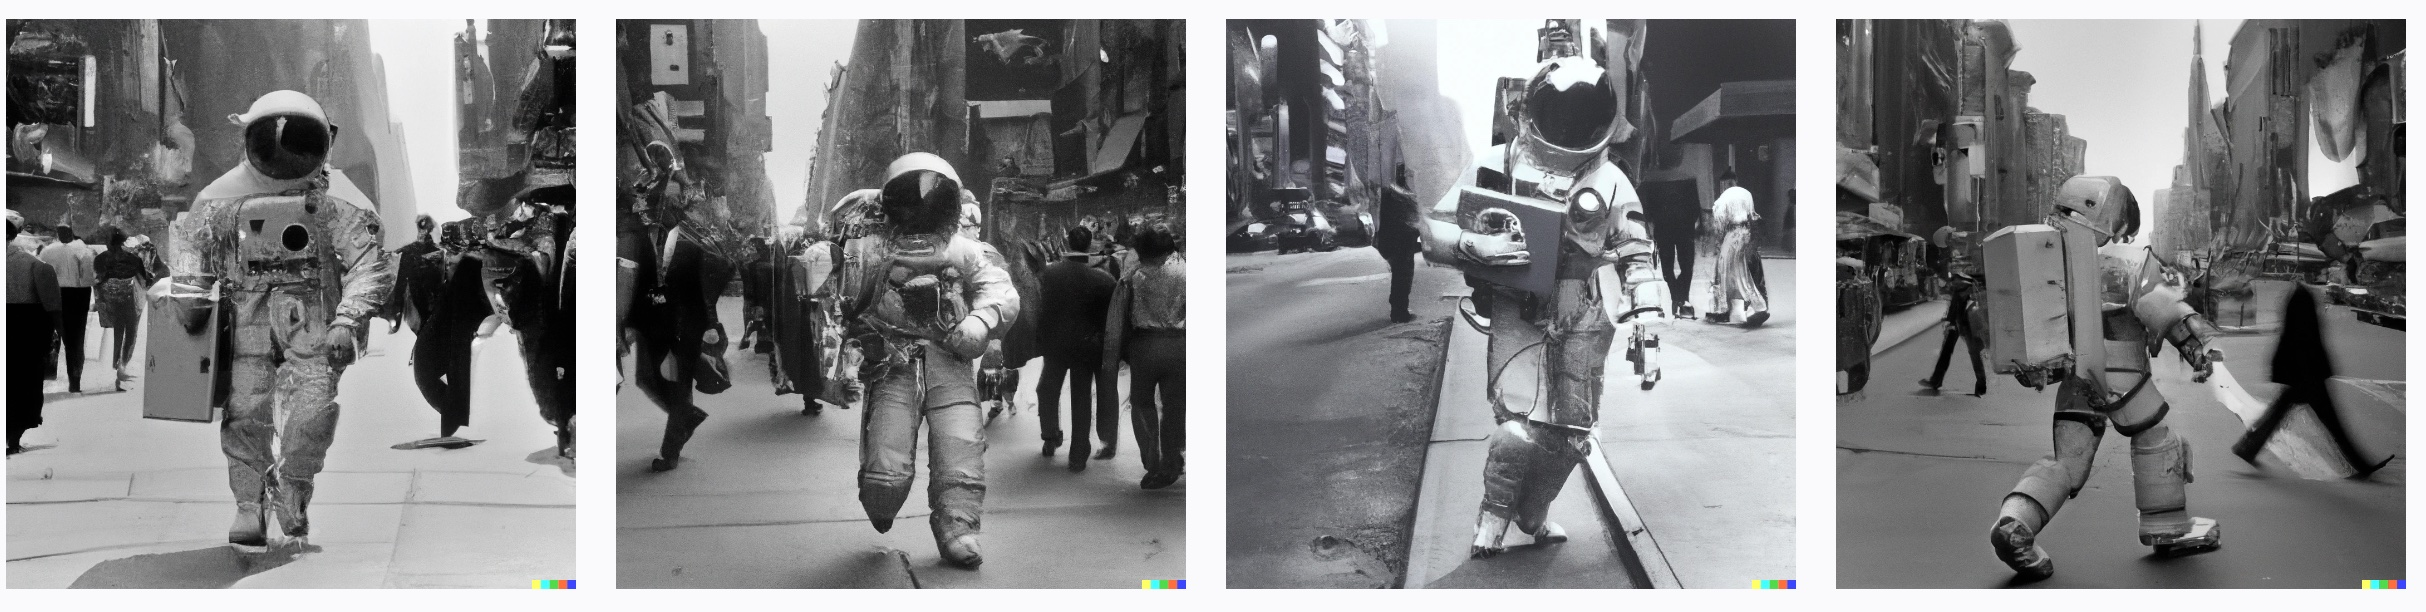 4 images of astronaut in spacesuit carrying briefcase walking on busy New York street in 1950's. retro, photorealistic, Robert Doisneau